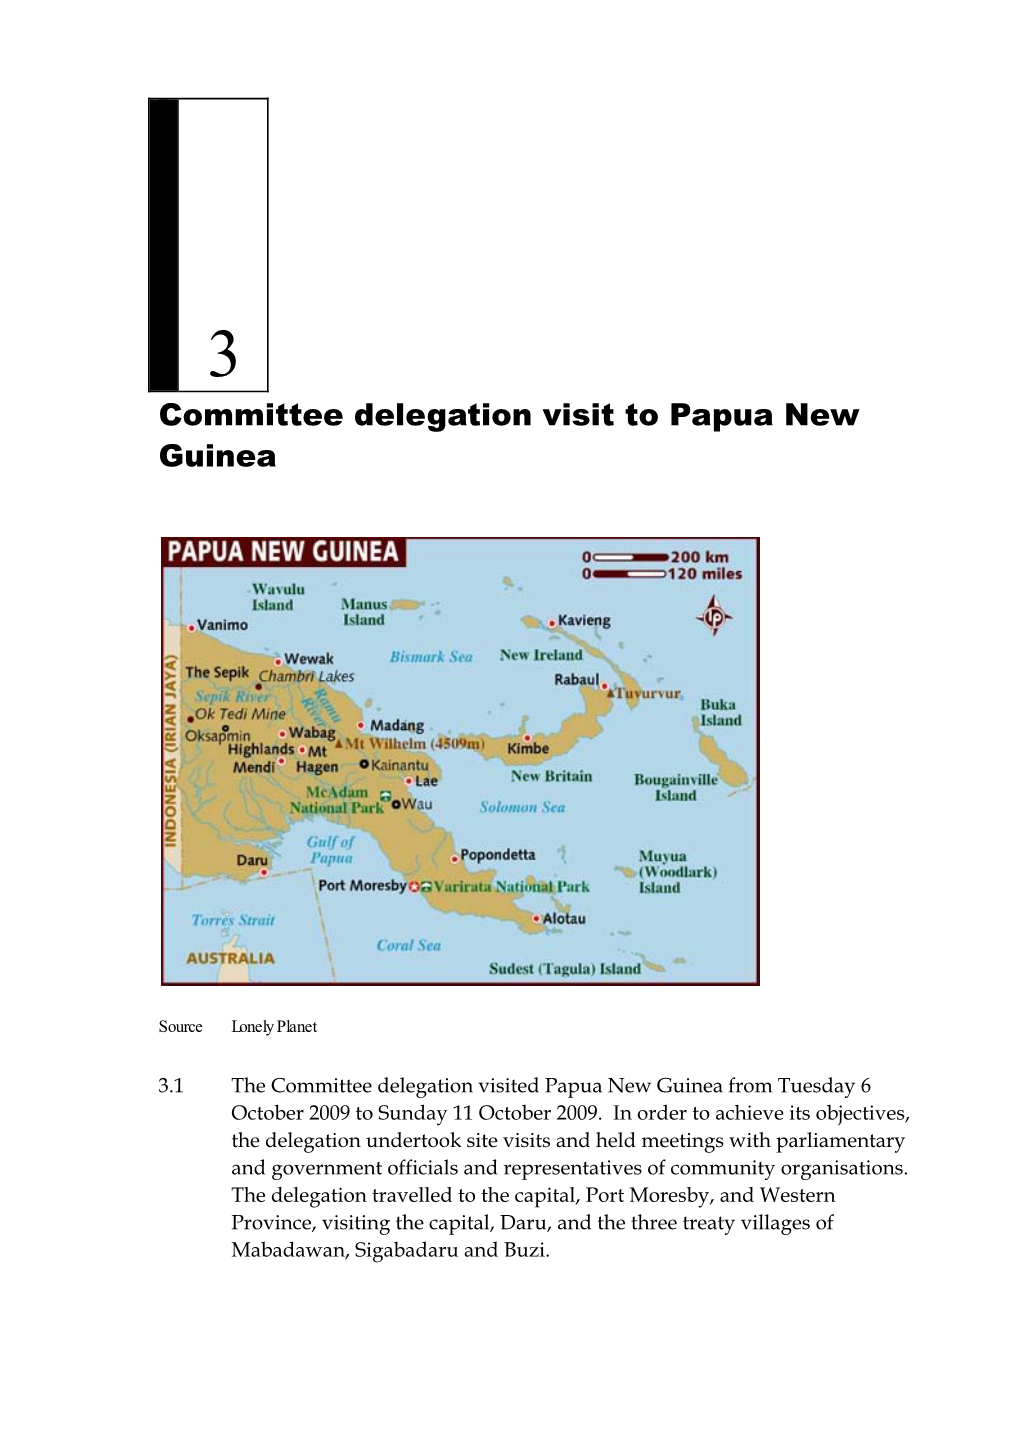 Committee Delegation Visit to Papua New Guinea